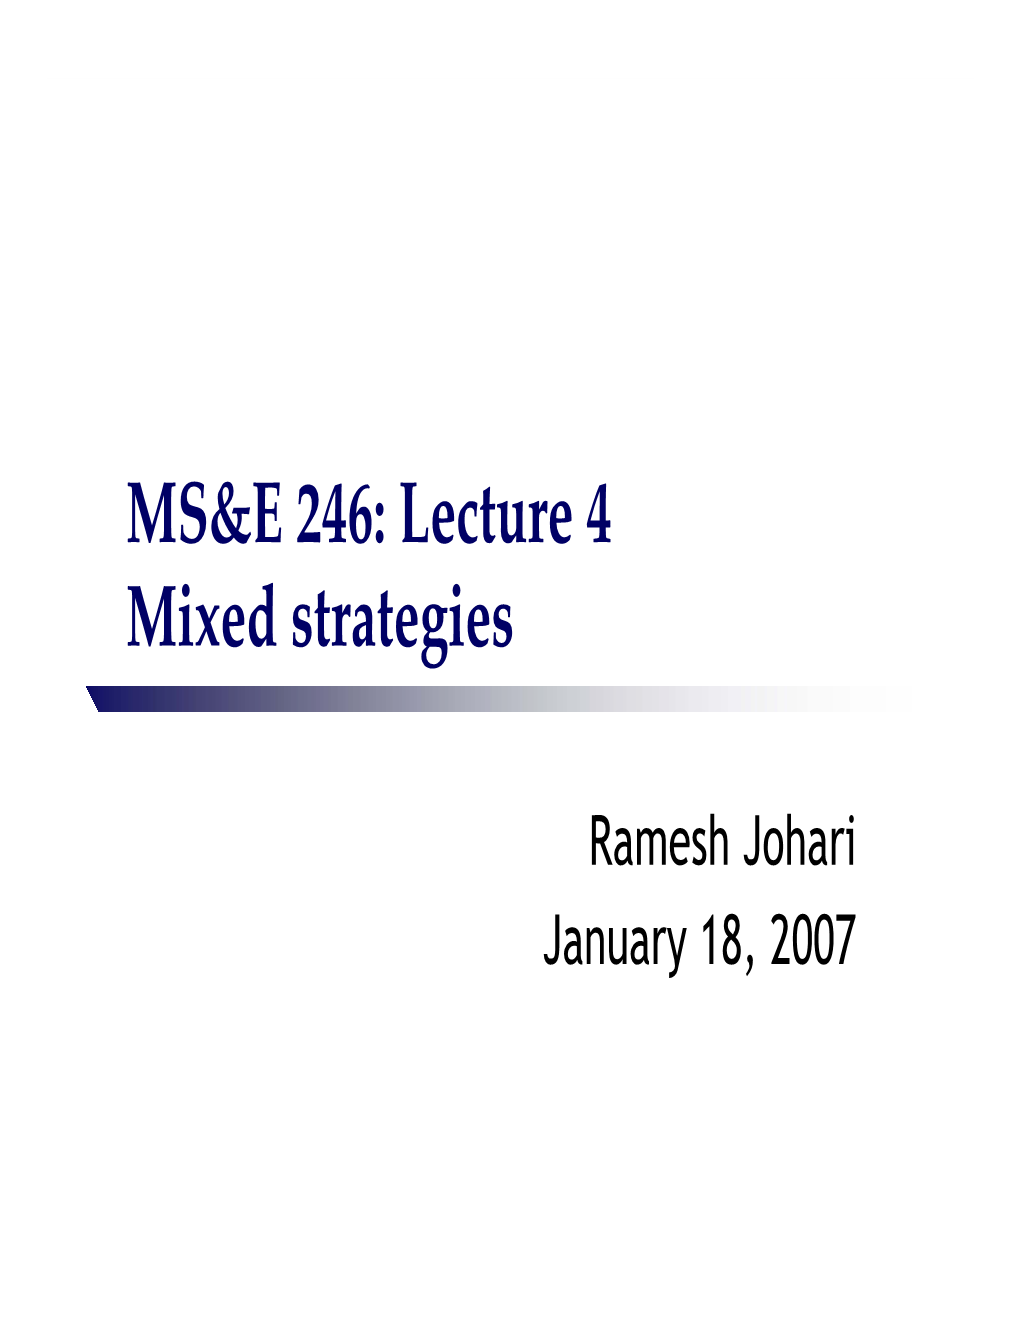 MS&E 246: Lecture 4 Mixed Strategies